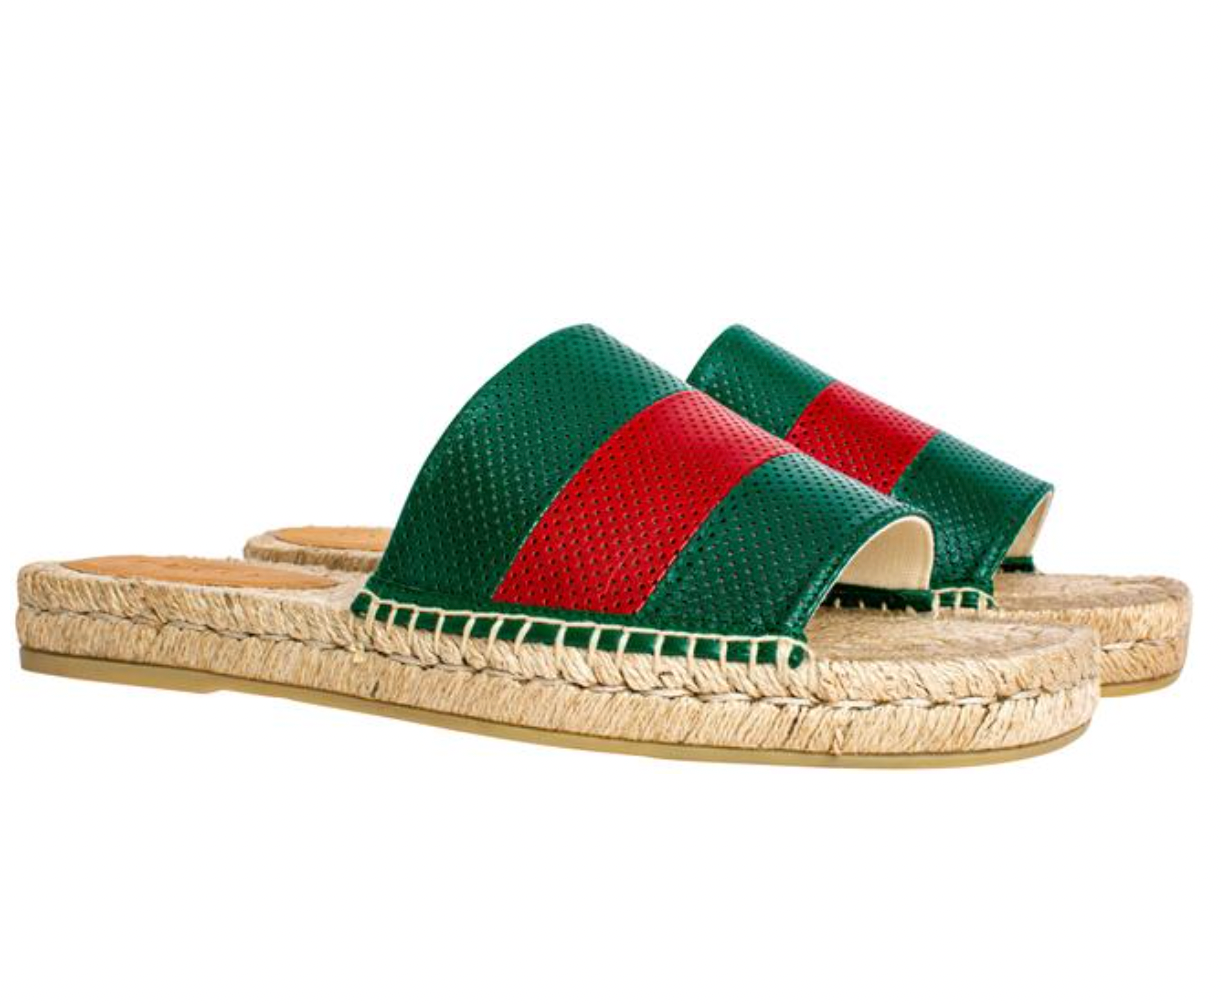 Gucci, Shoes, Nwt Gucci Lilibeth Sylvie Web Espadrille Wedge Sandals  Green Red 365